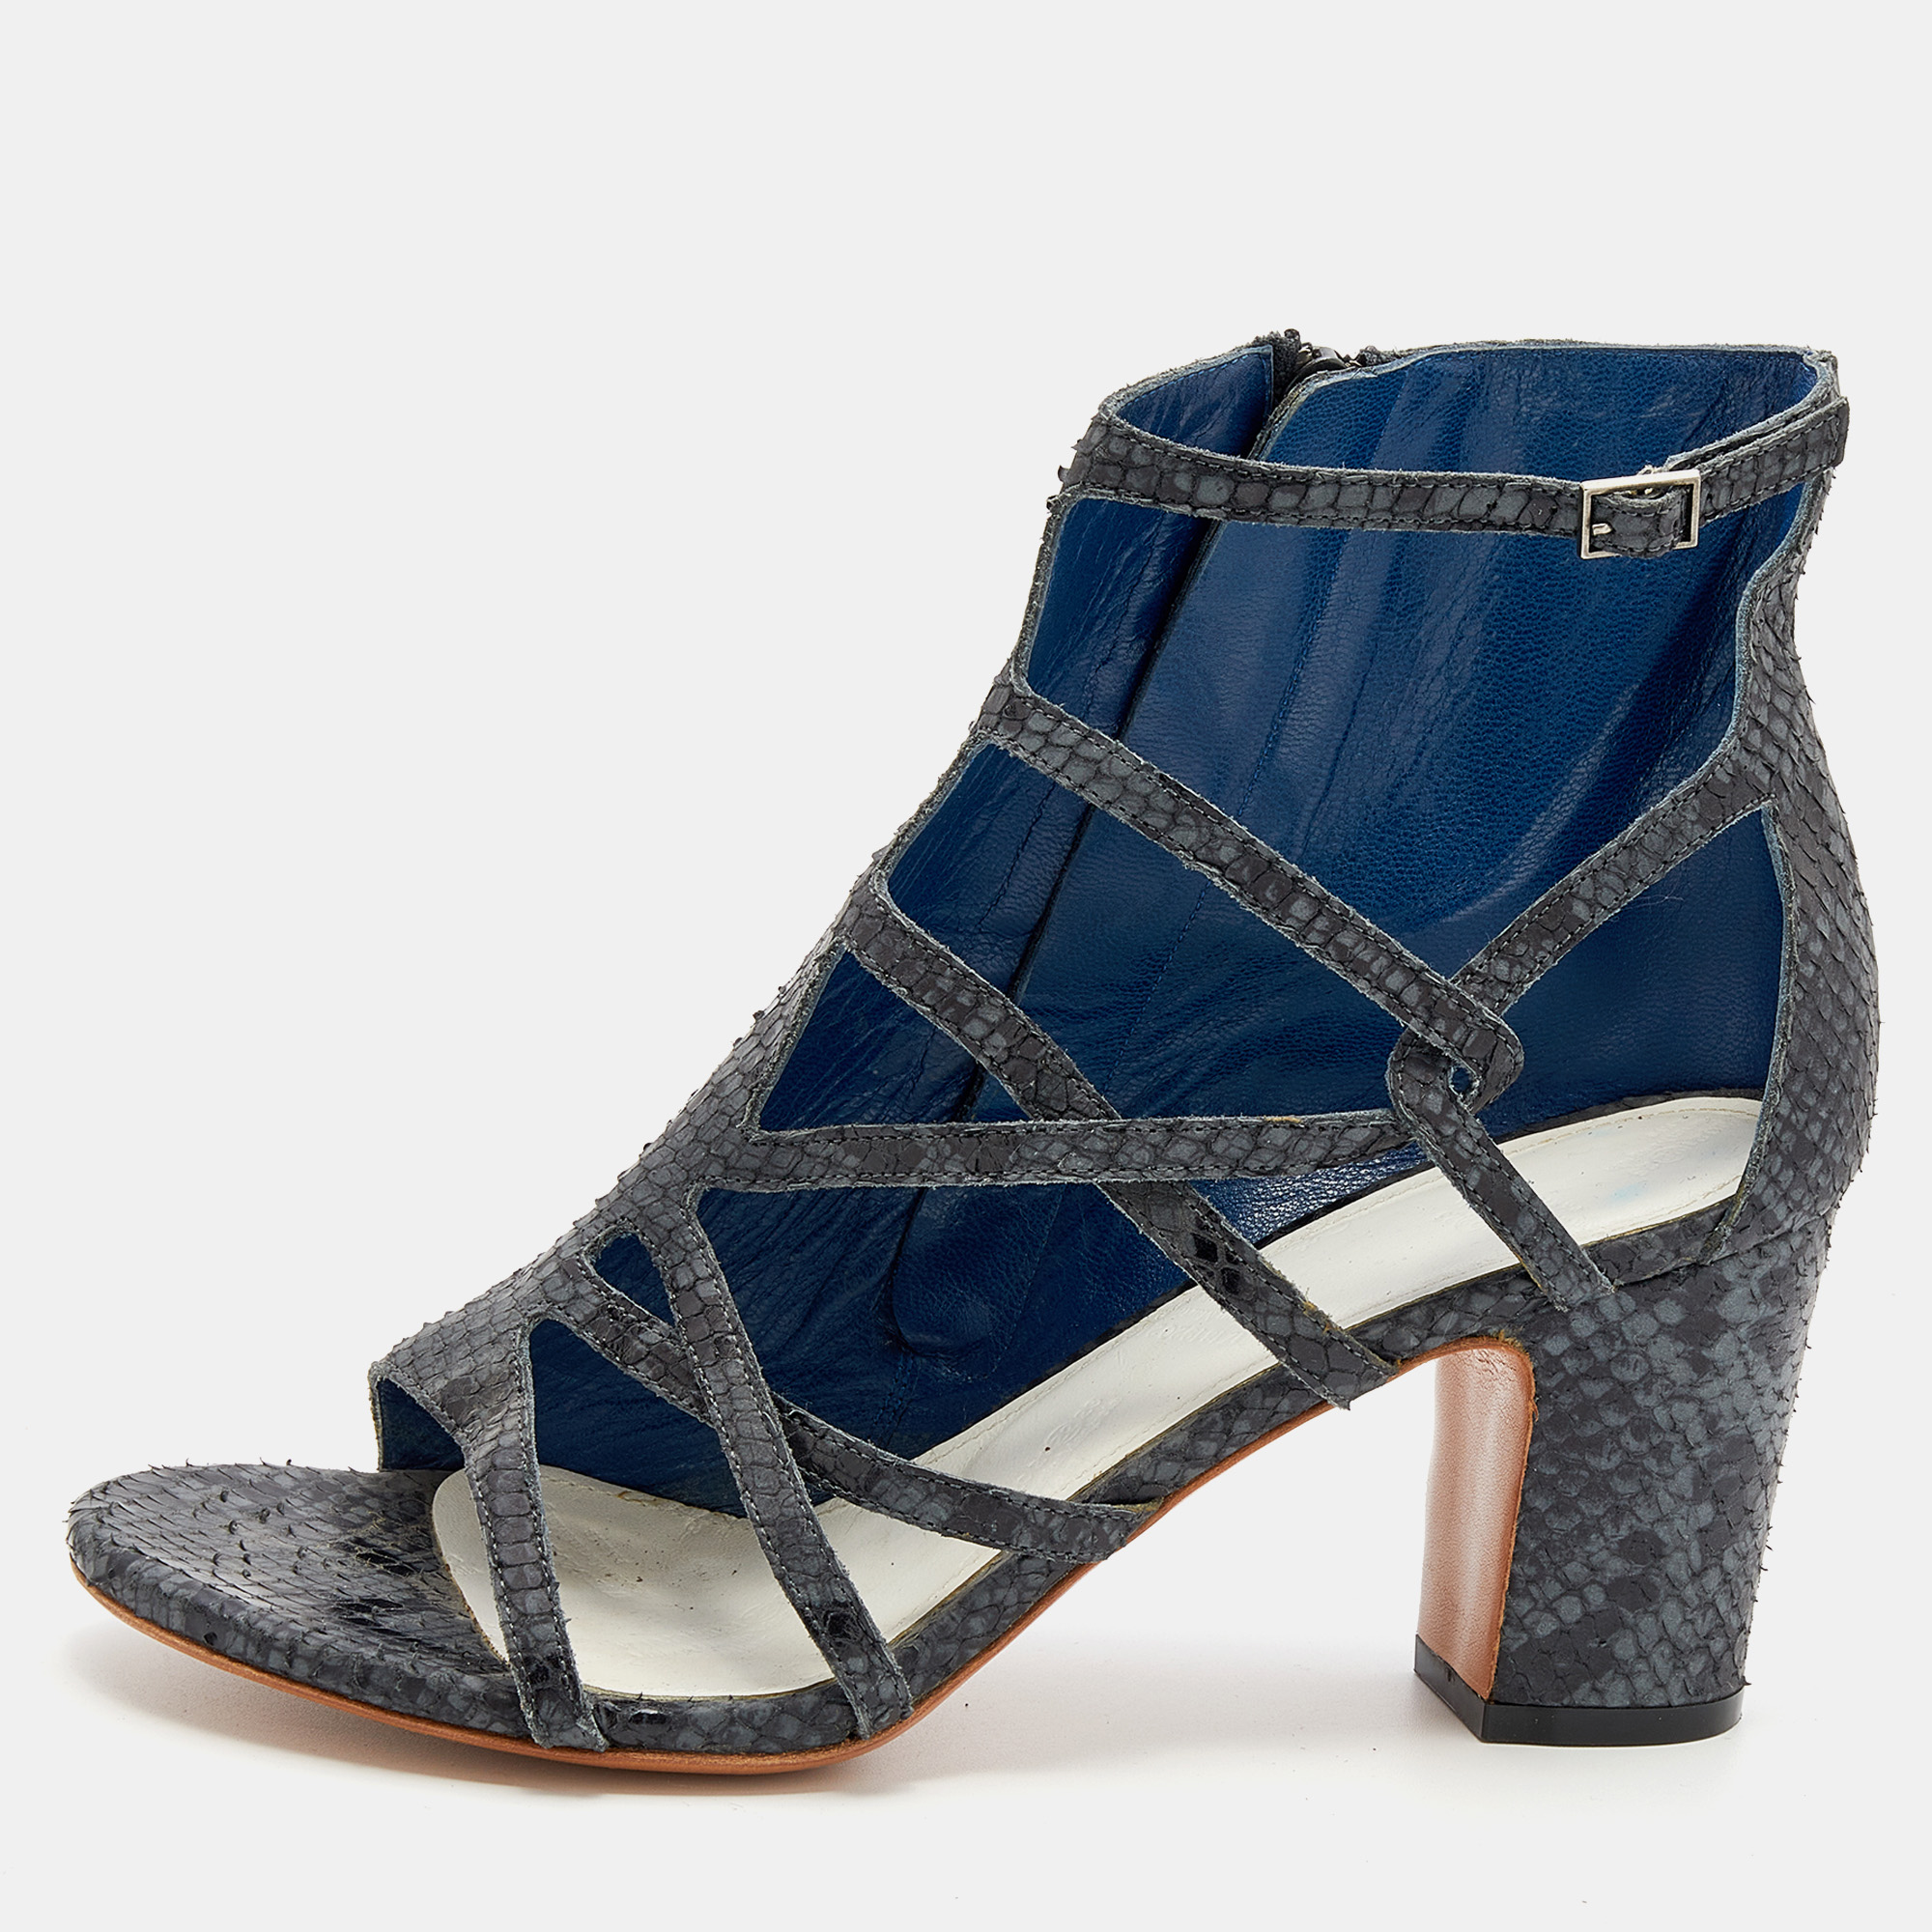 Grey/black Python Embossed Leather Strappy Open Toe Booties